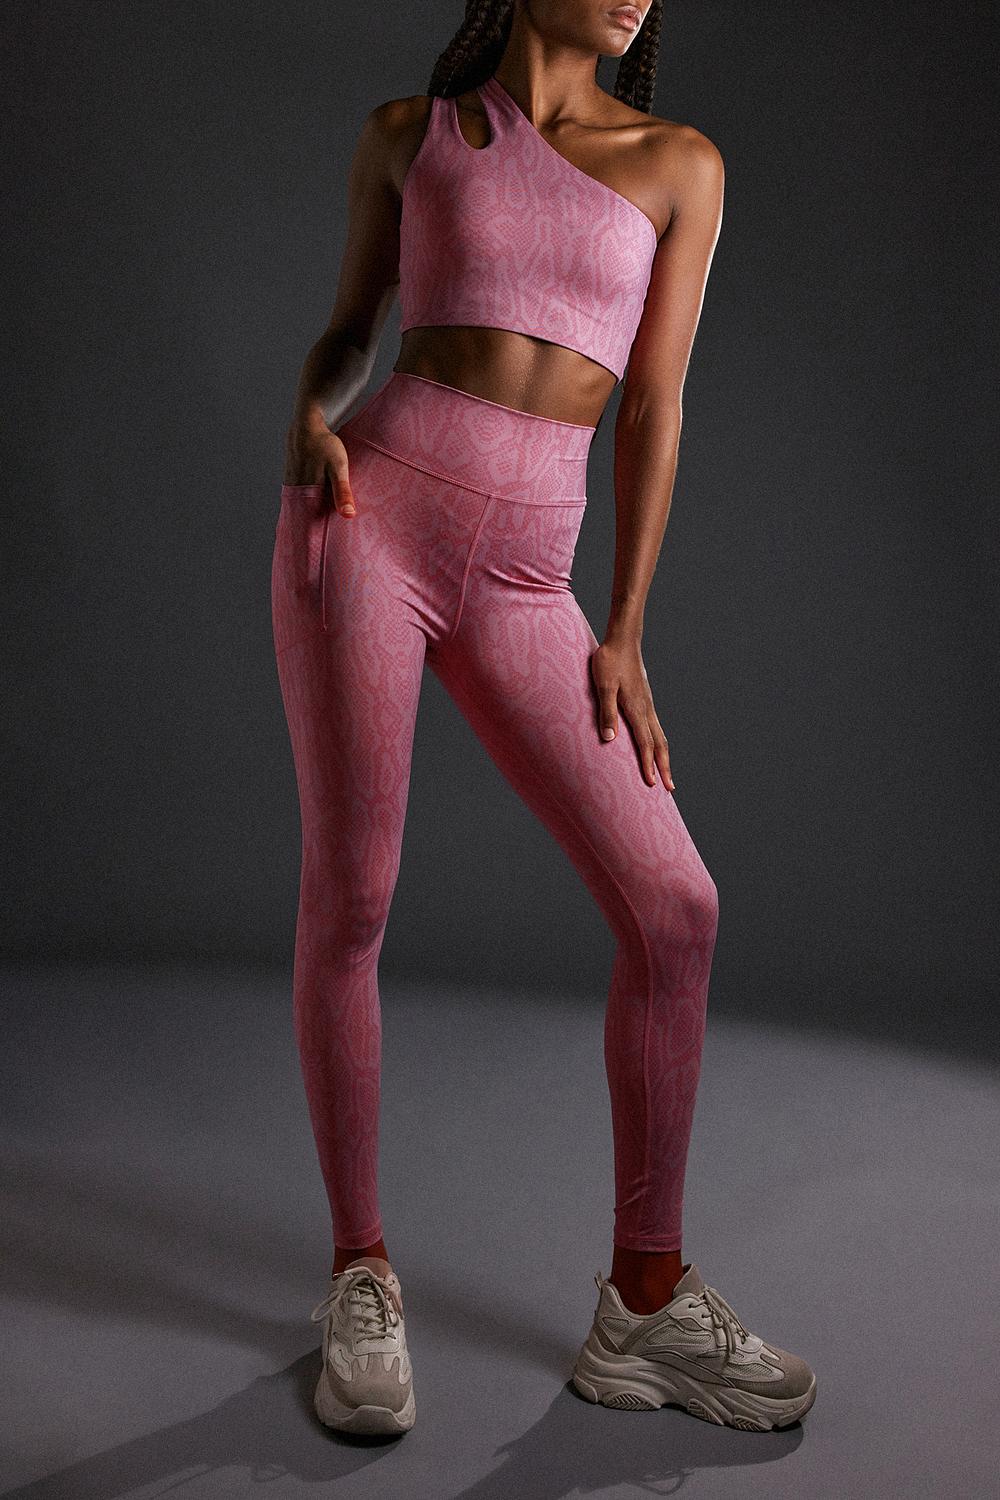 Pink sports leggings with snake print